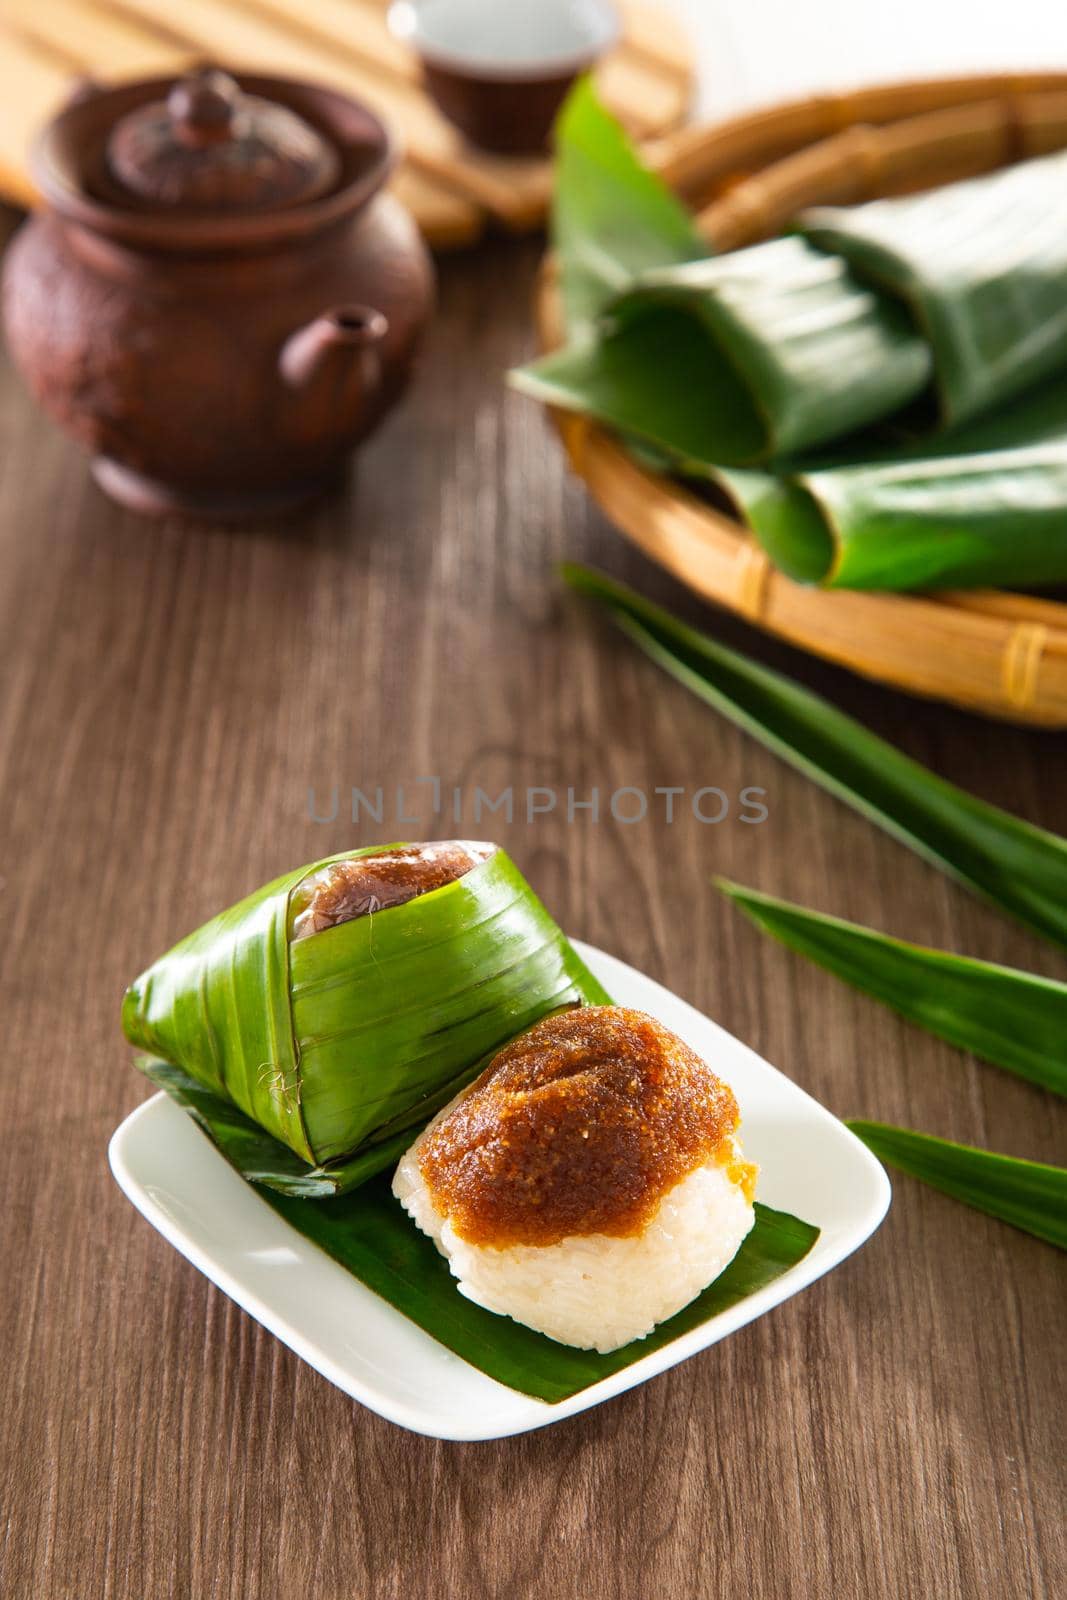 Kuih Pulut inti, traditional Malaysian Nyonya sweet dessert. It is made of steamed glutinous rice with coconut milk.